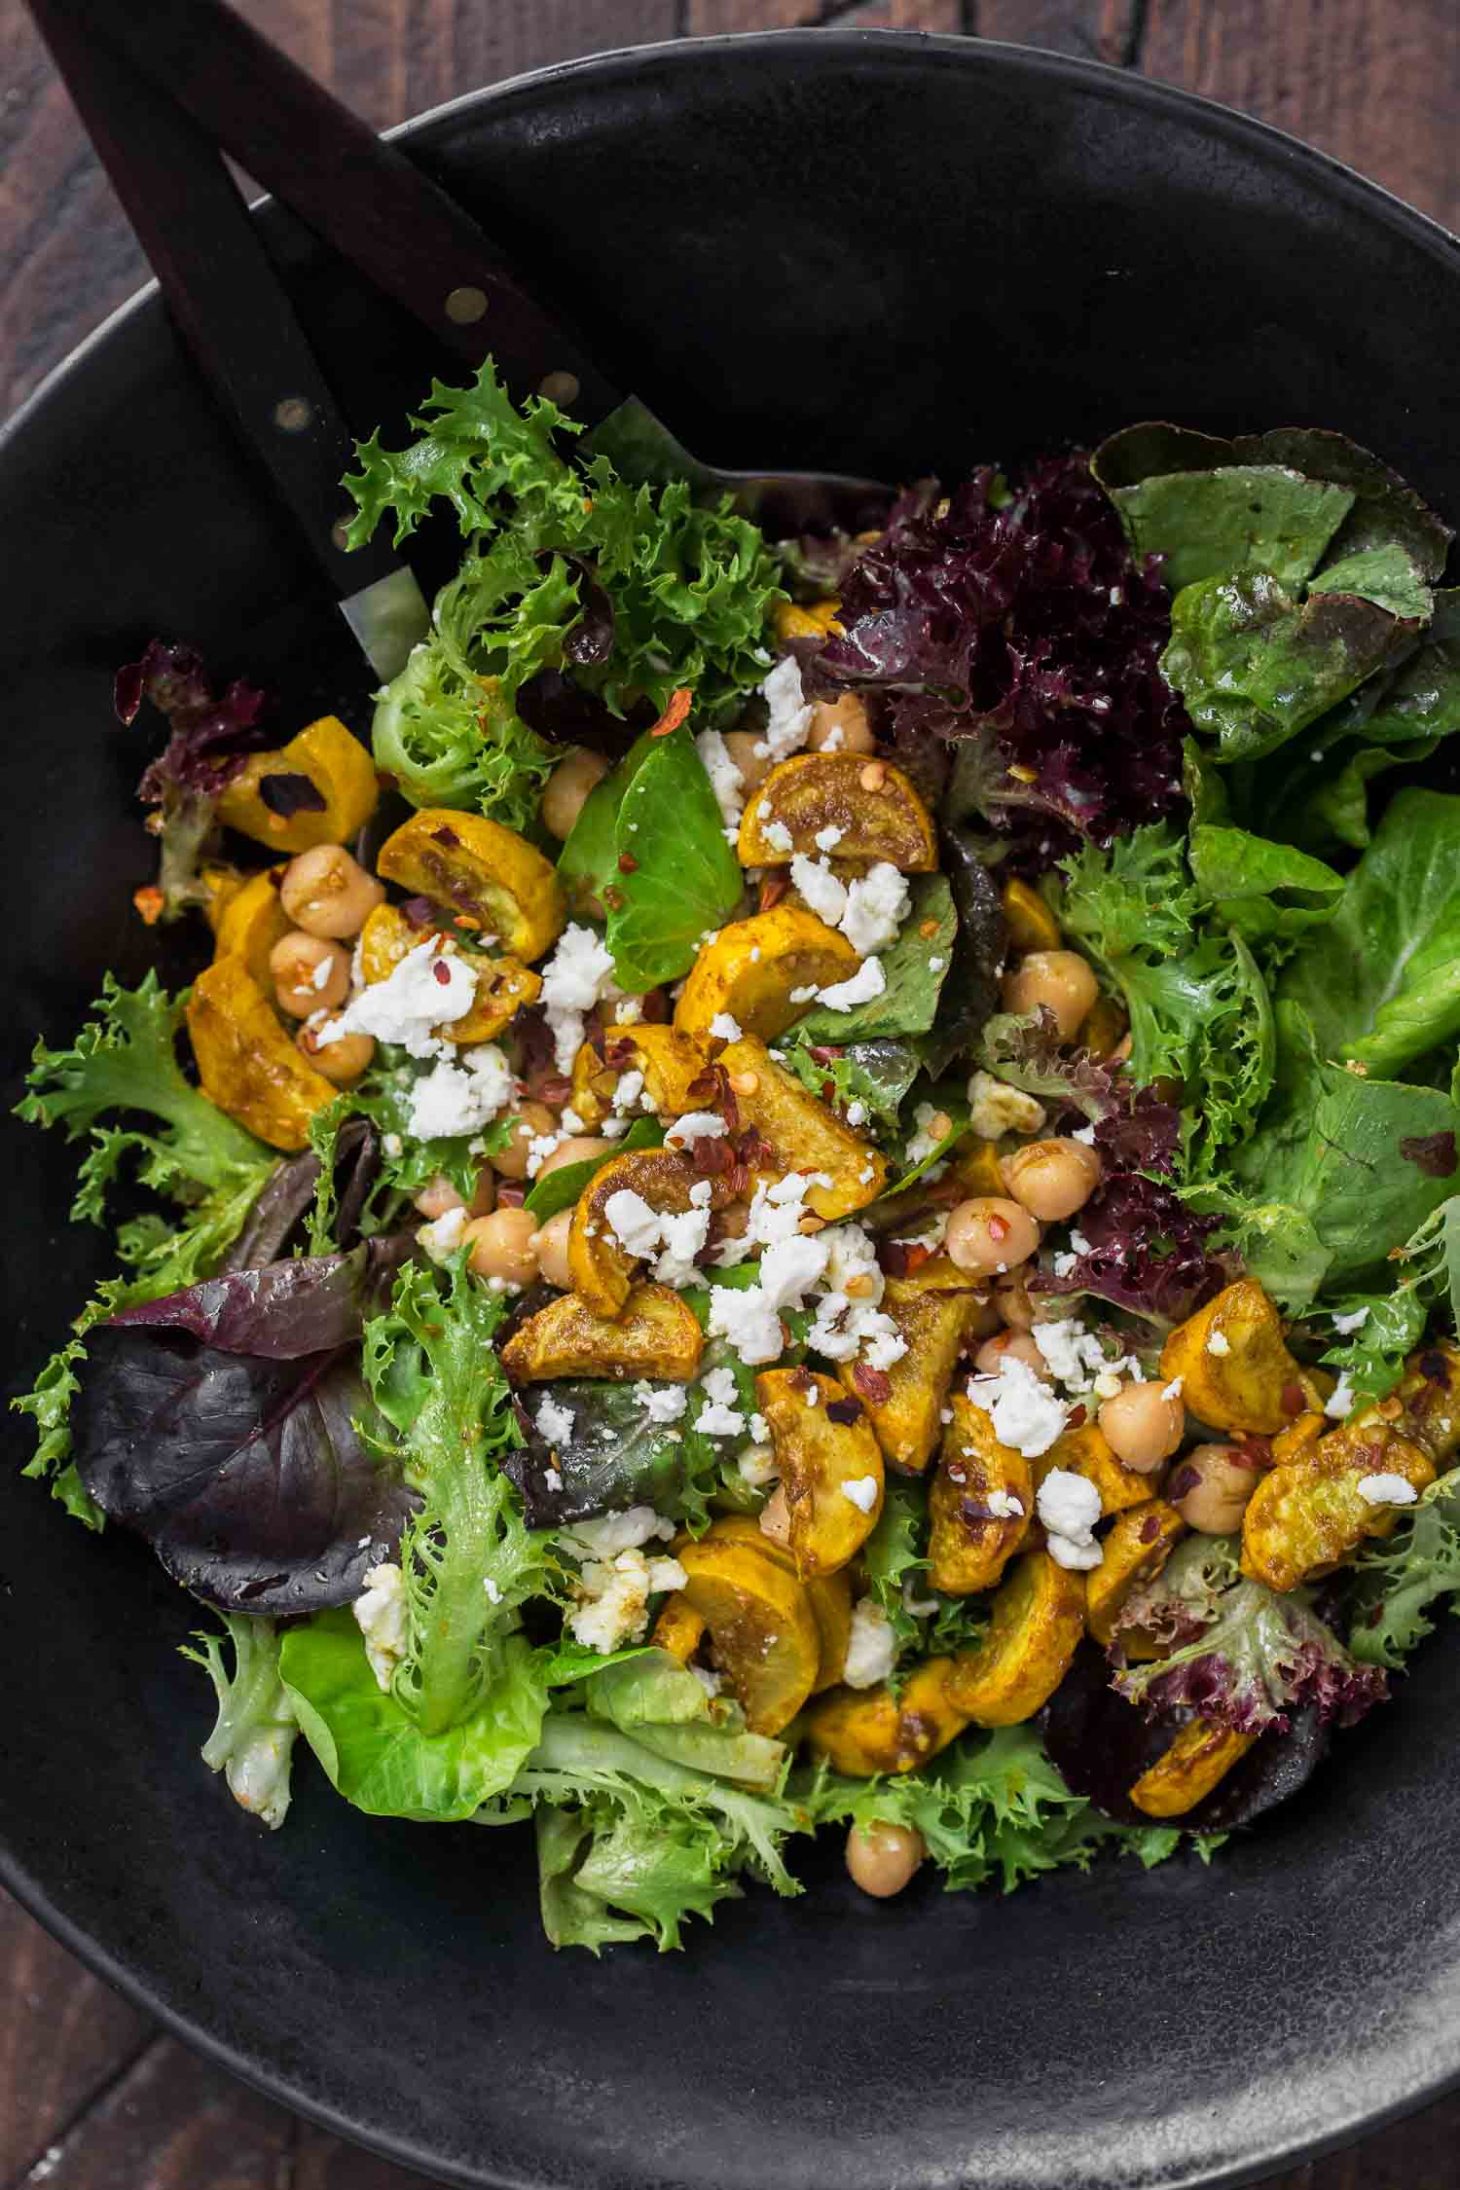 Spiced Summer Squash Salad with Chickpeas